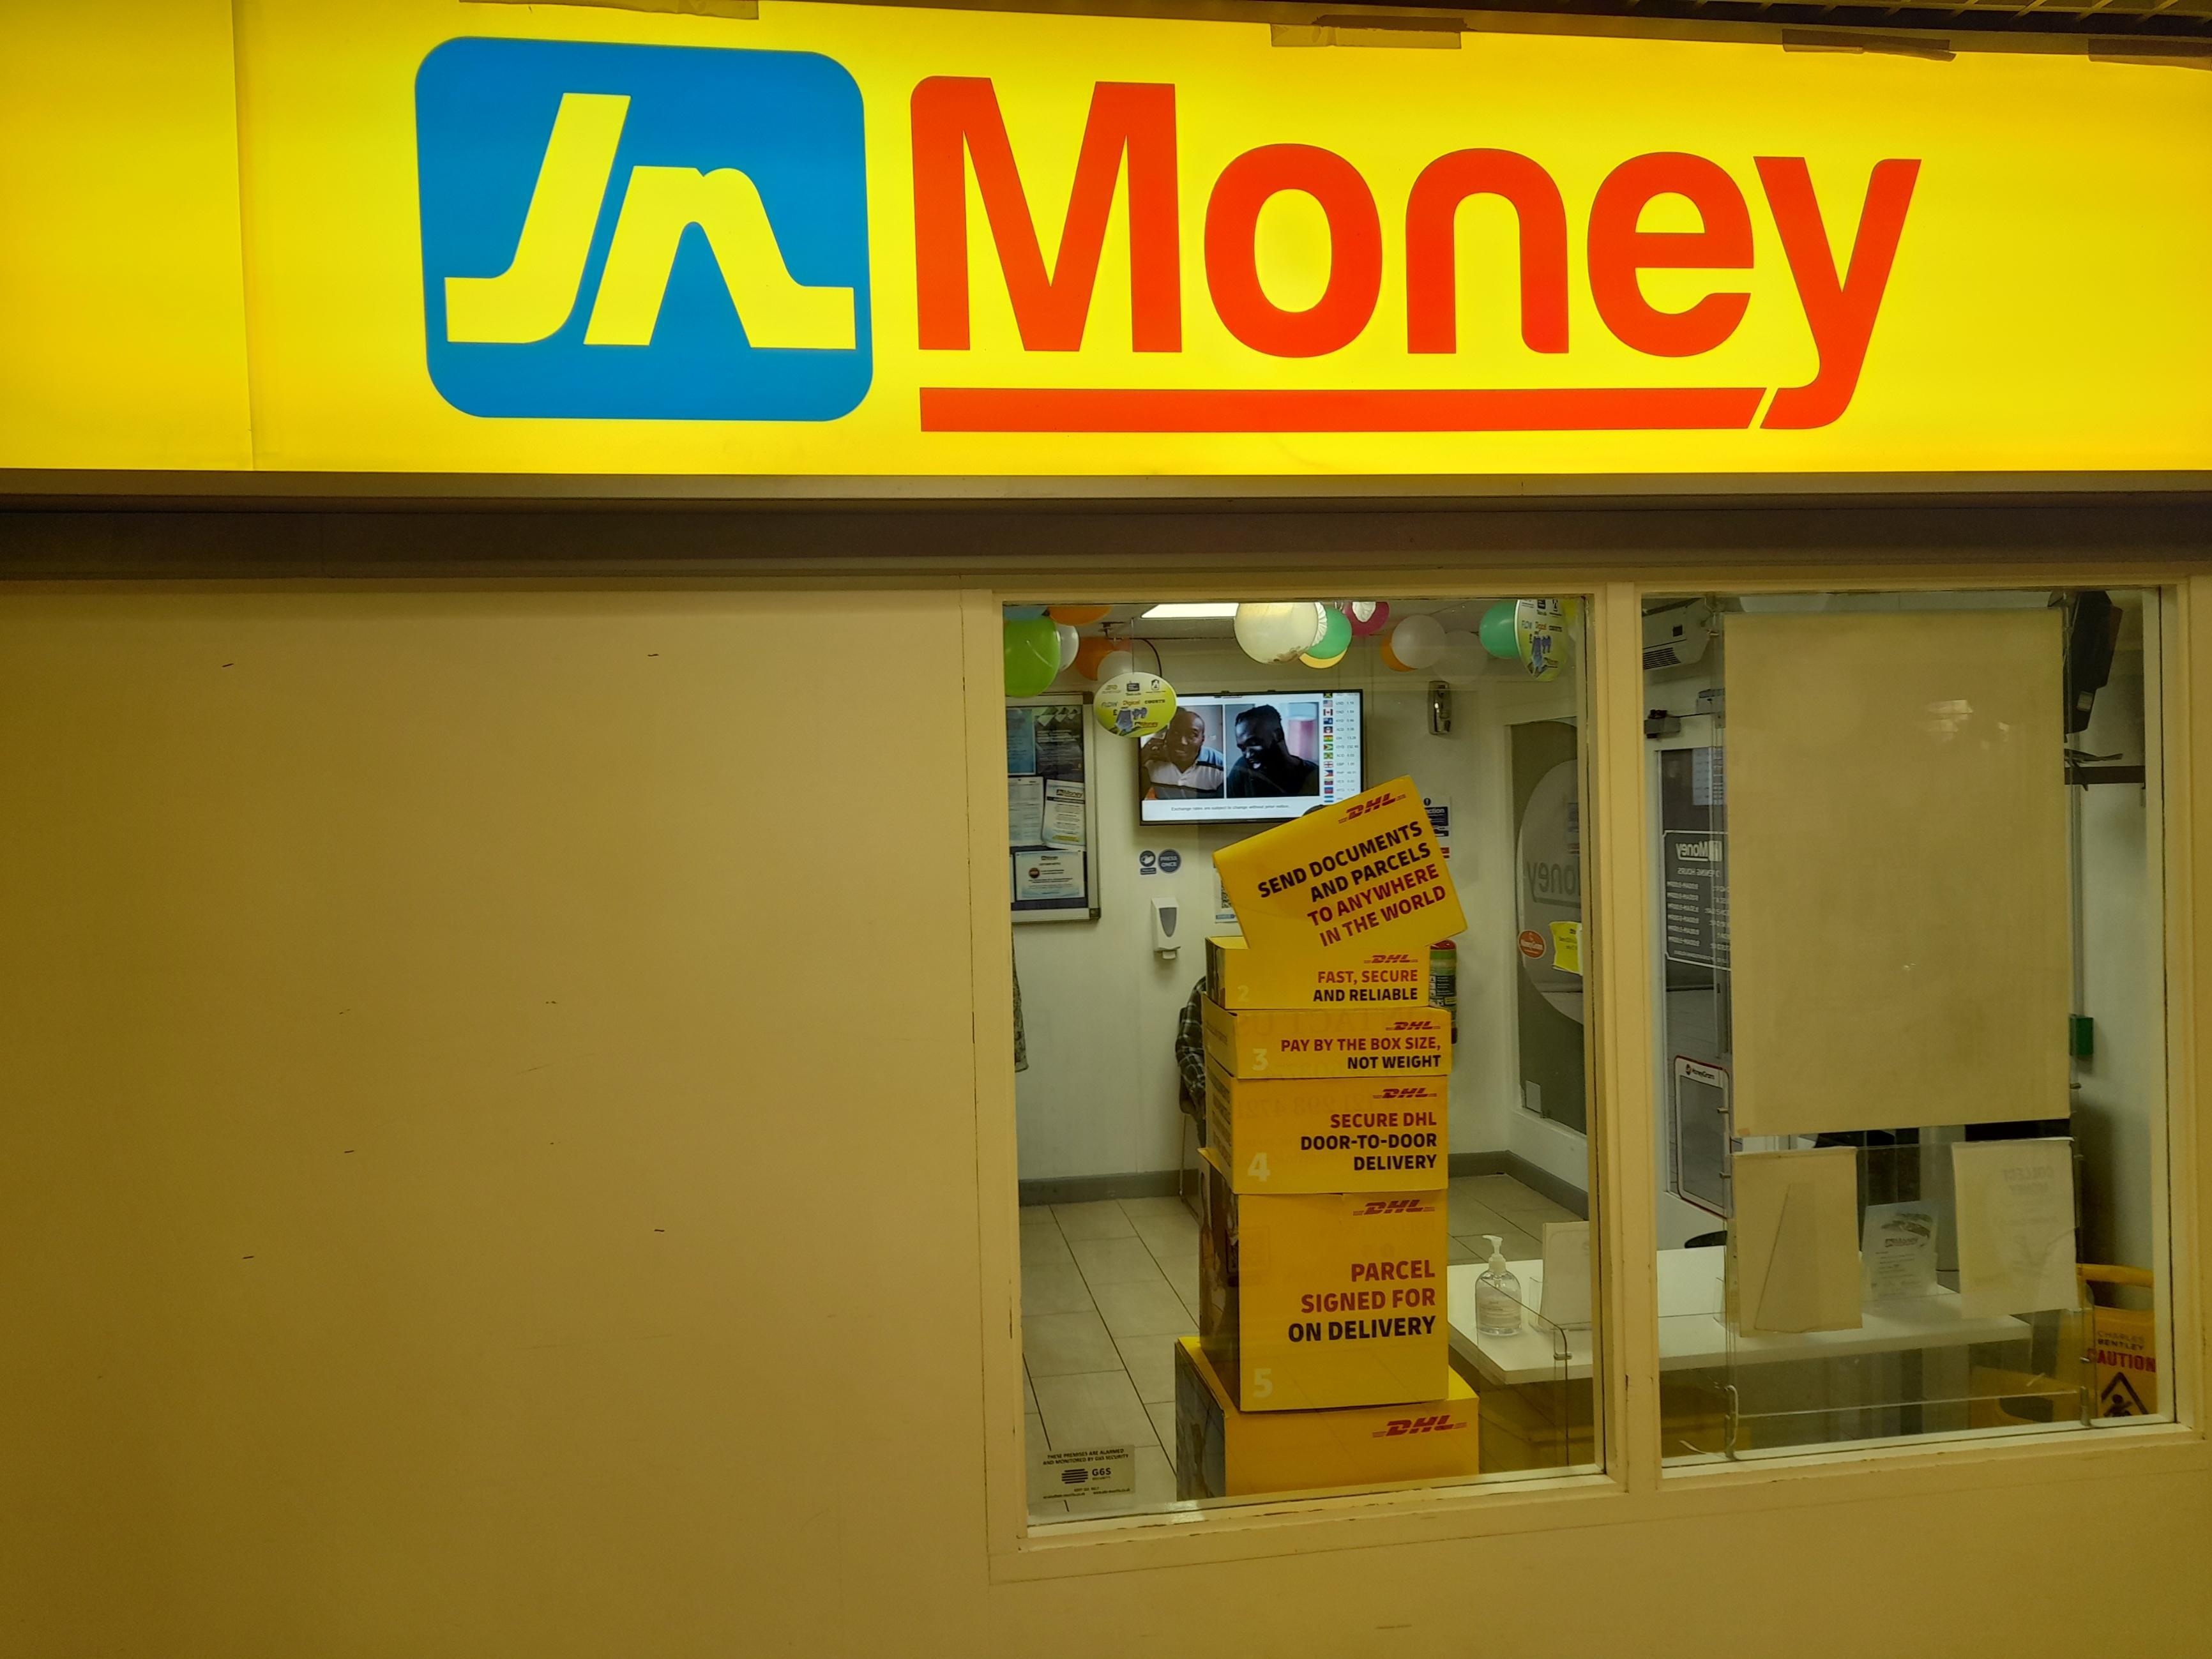 Images DHL Express Service Point (JN Money Perry Barr)